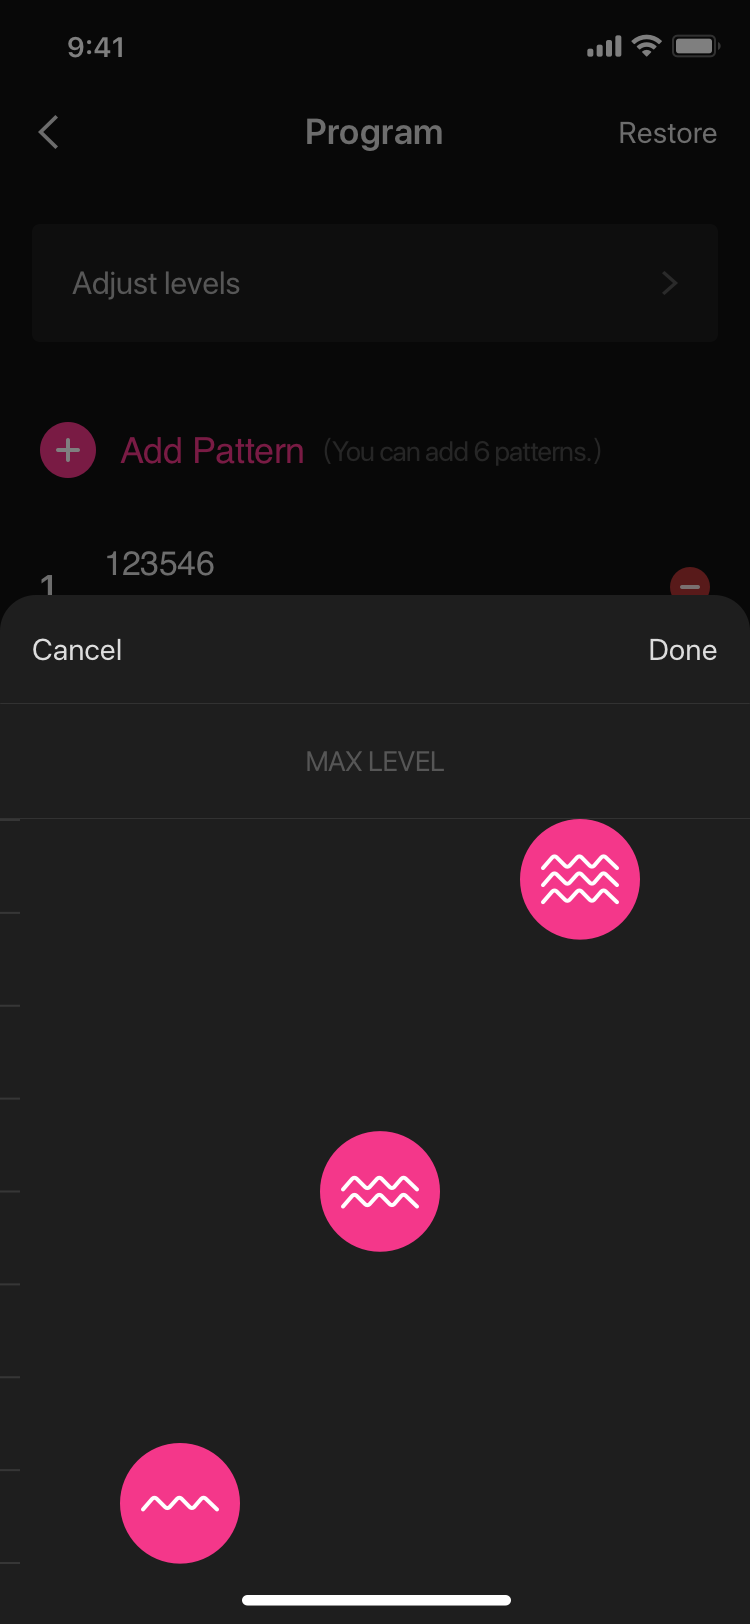 Mobile app for public play using butt plug.